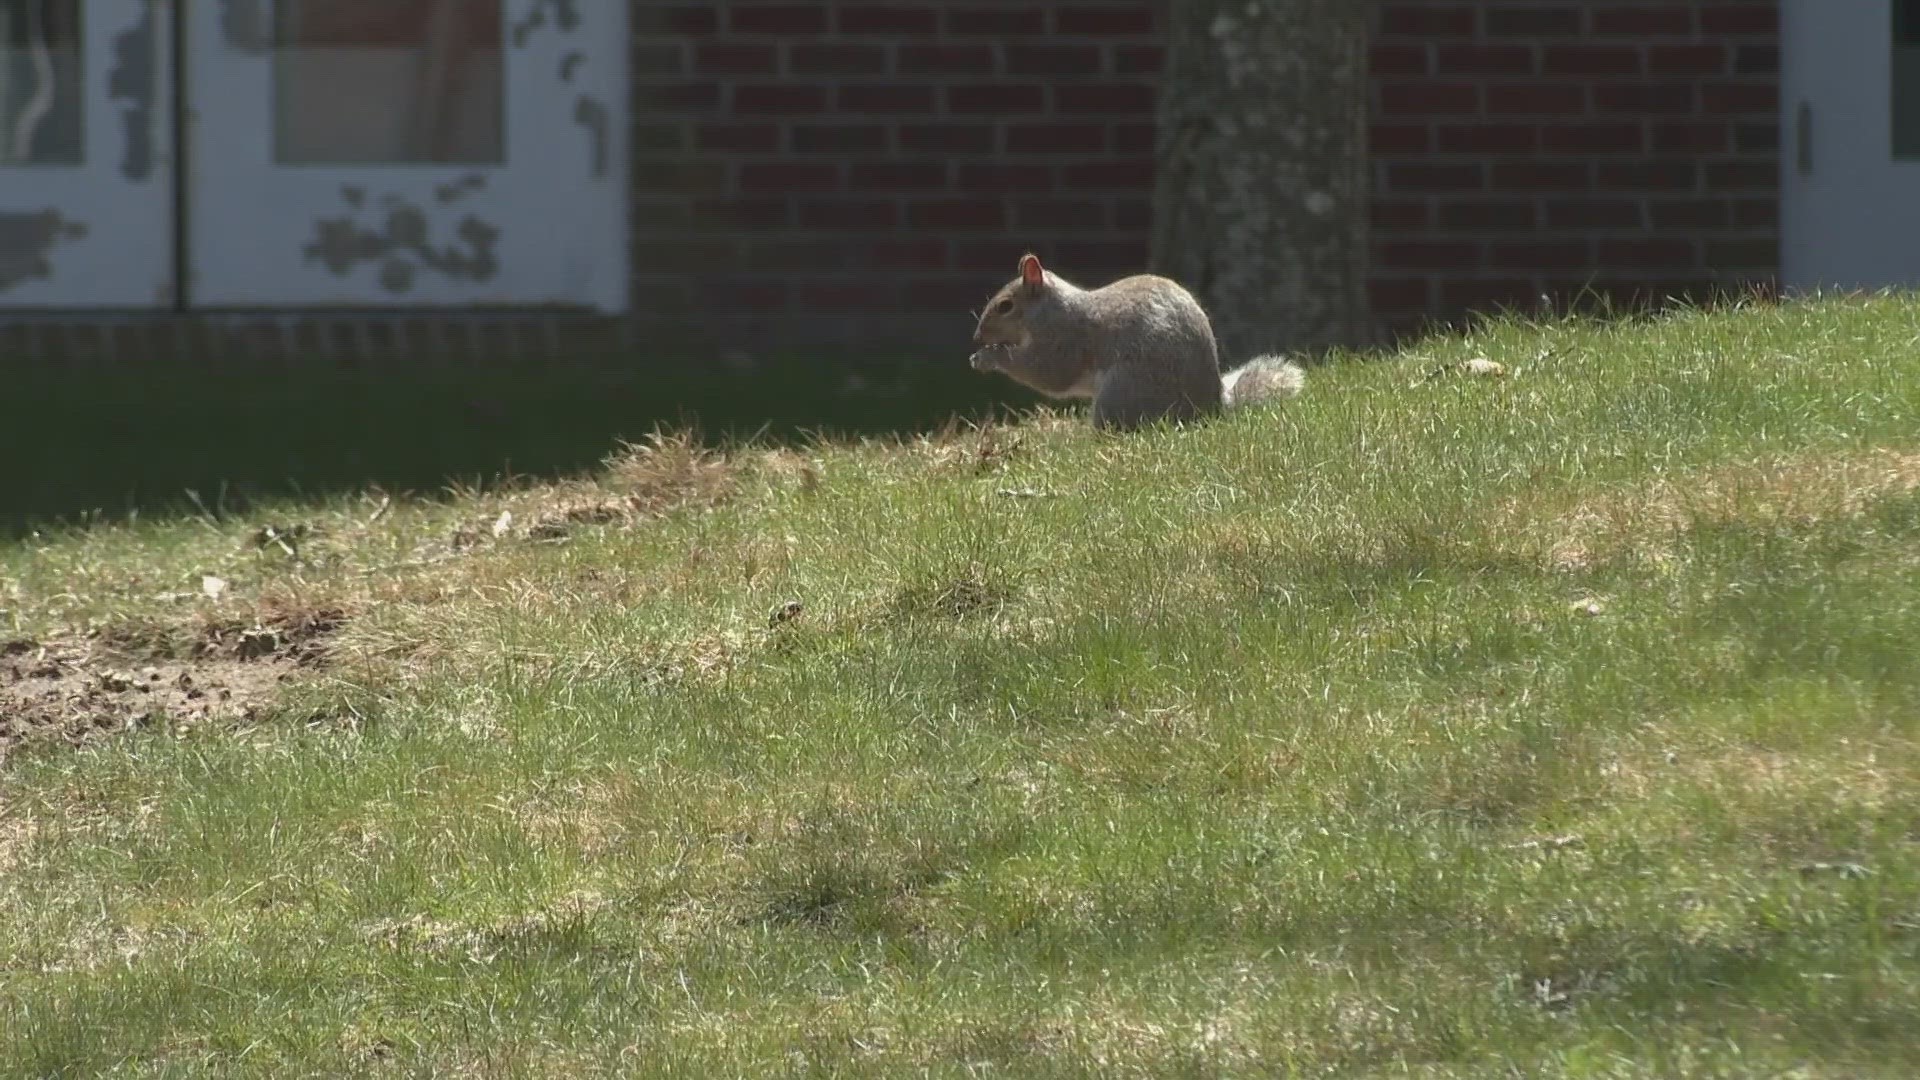 Project Squirrel helps track and analyze data of gray squirrels in the Biddeford area.